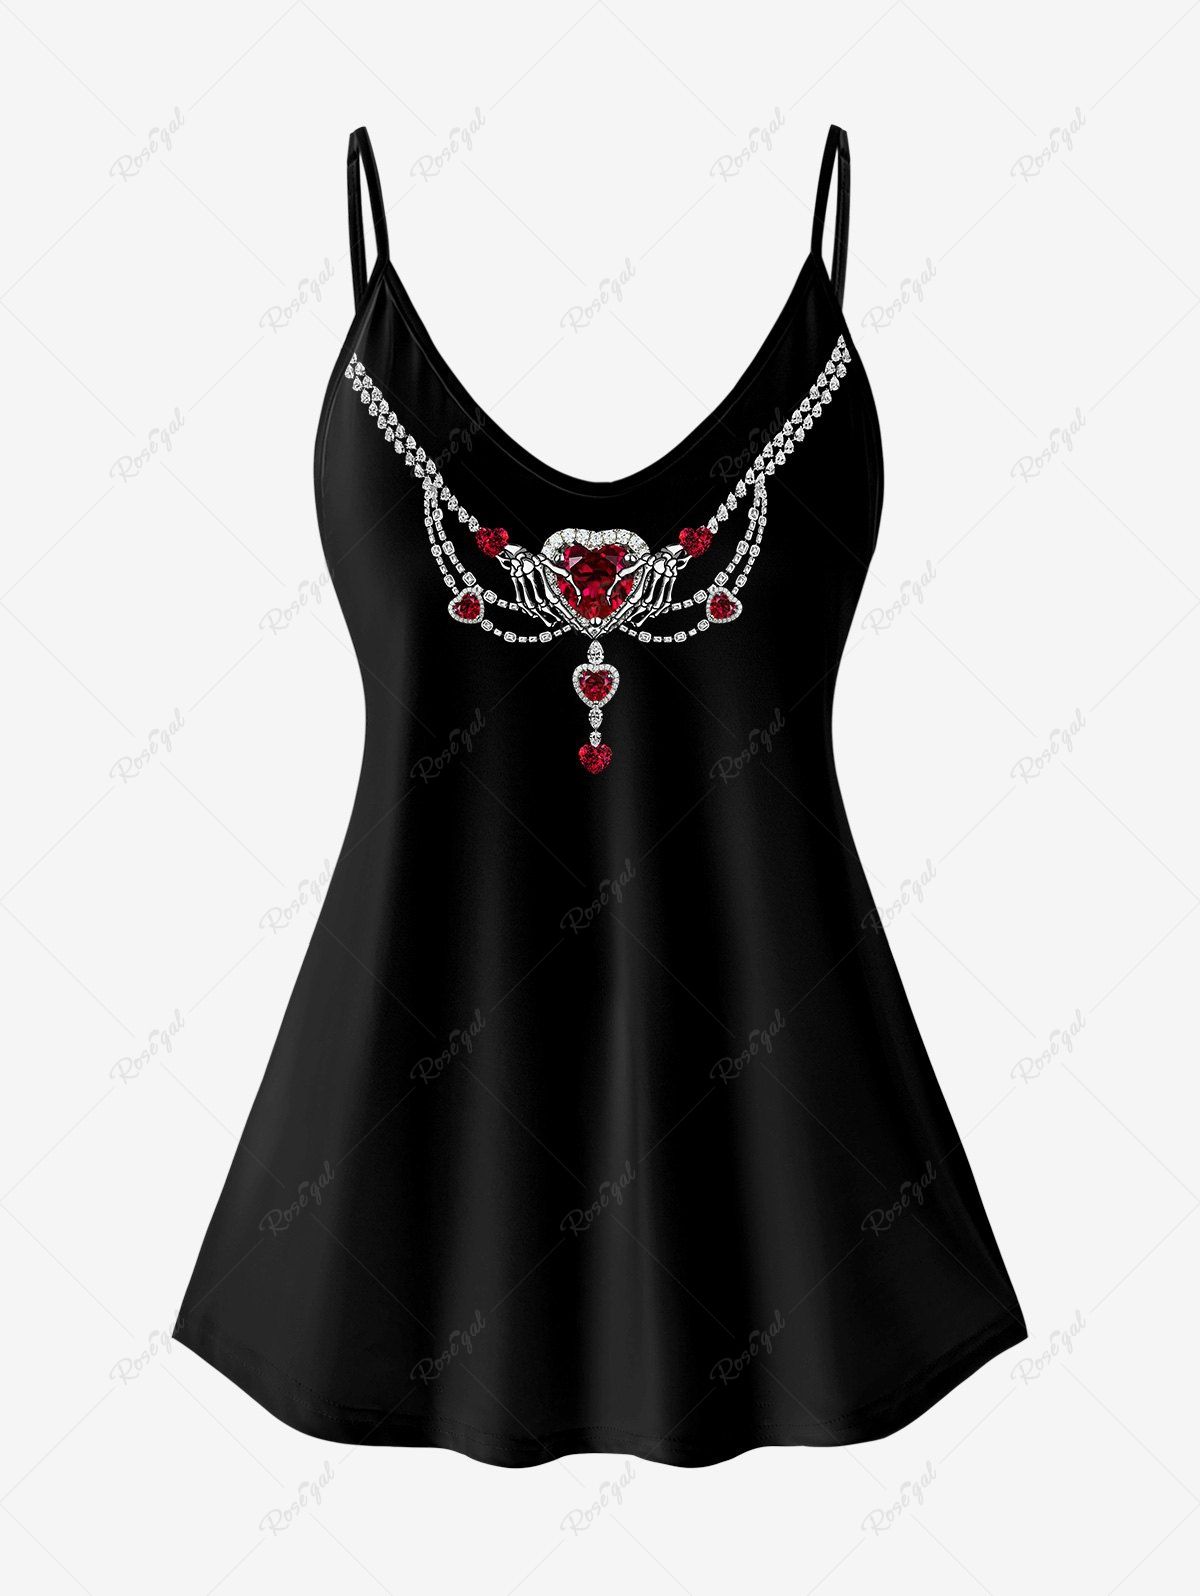 Outfits Gothic 3D Rhinestone Gem Print Cami Top (Adjustable Straps)  